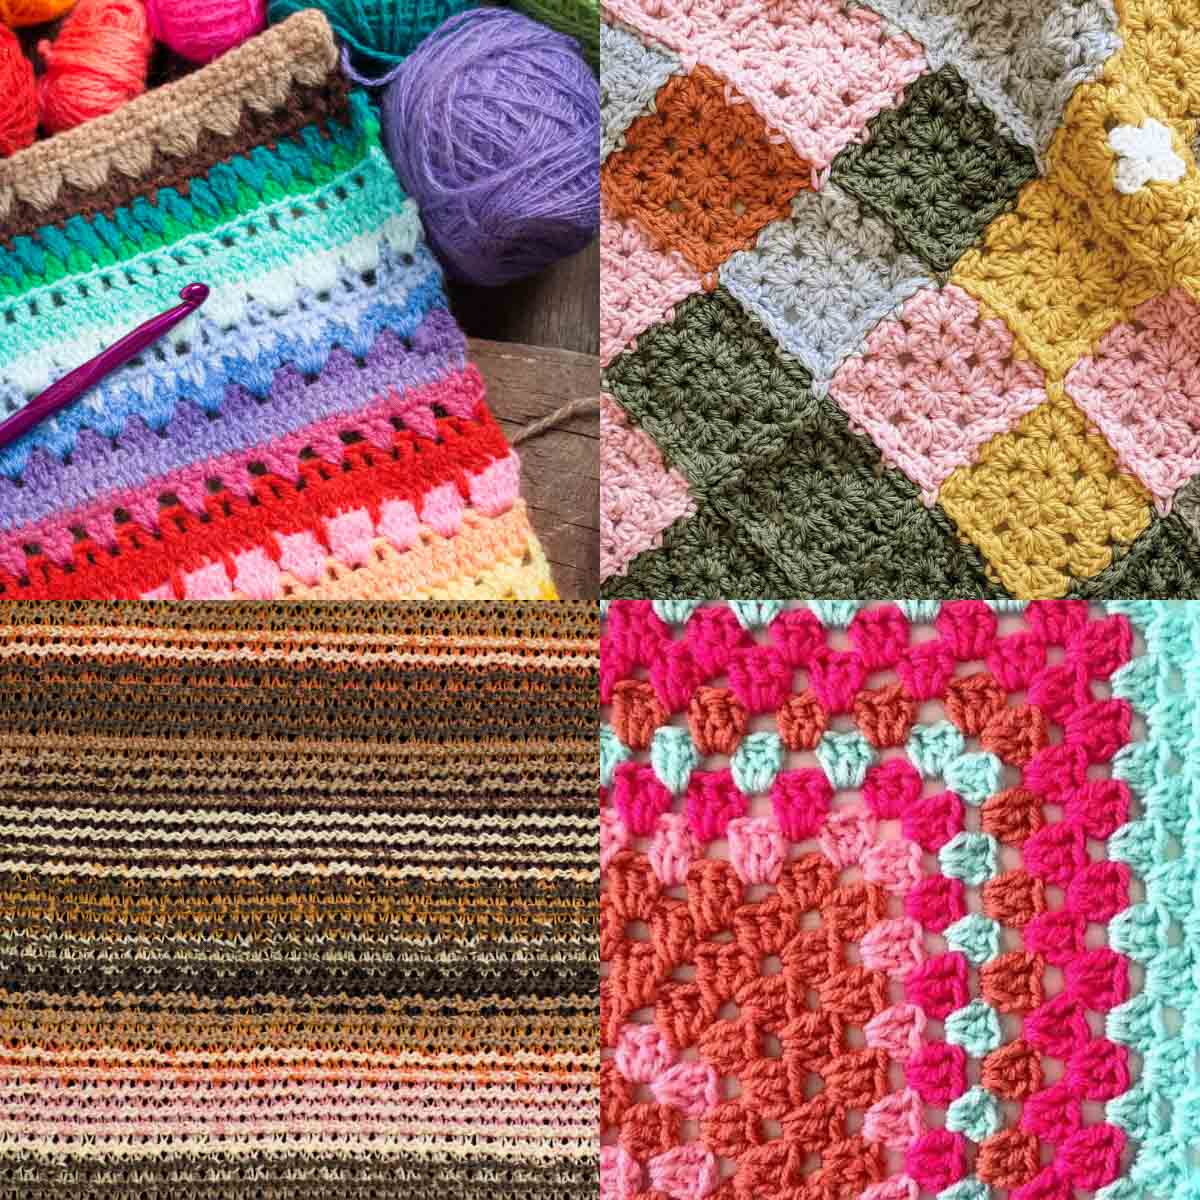 Crocheted Afghans: 25 Throws, Wraps, and Blankets to Crochet [Book]